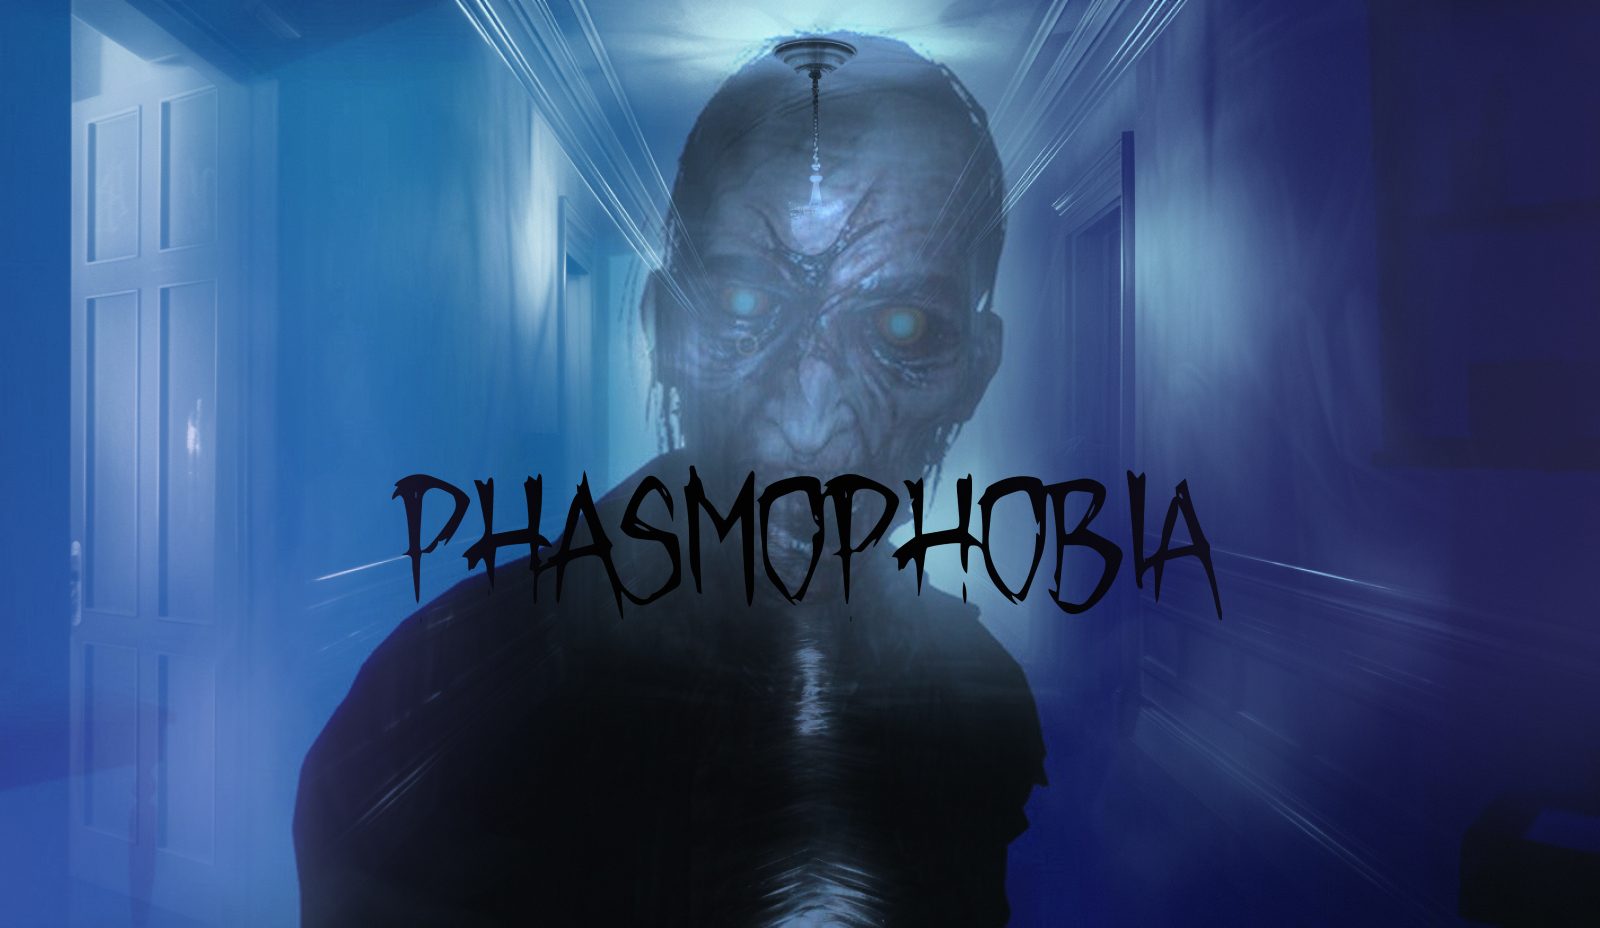 Phasmophobia voice changer